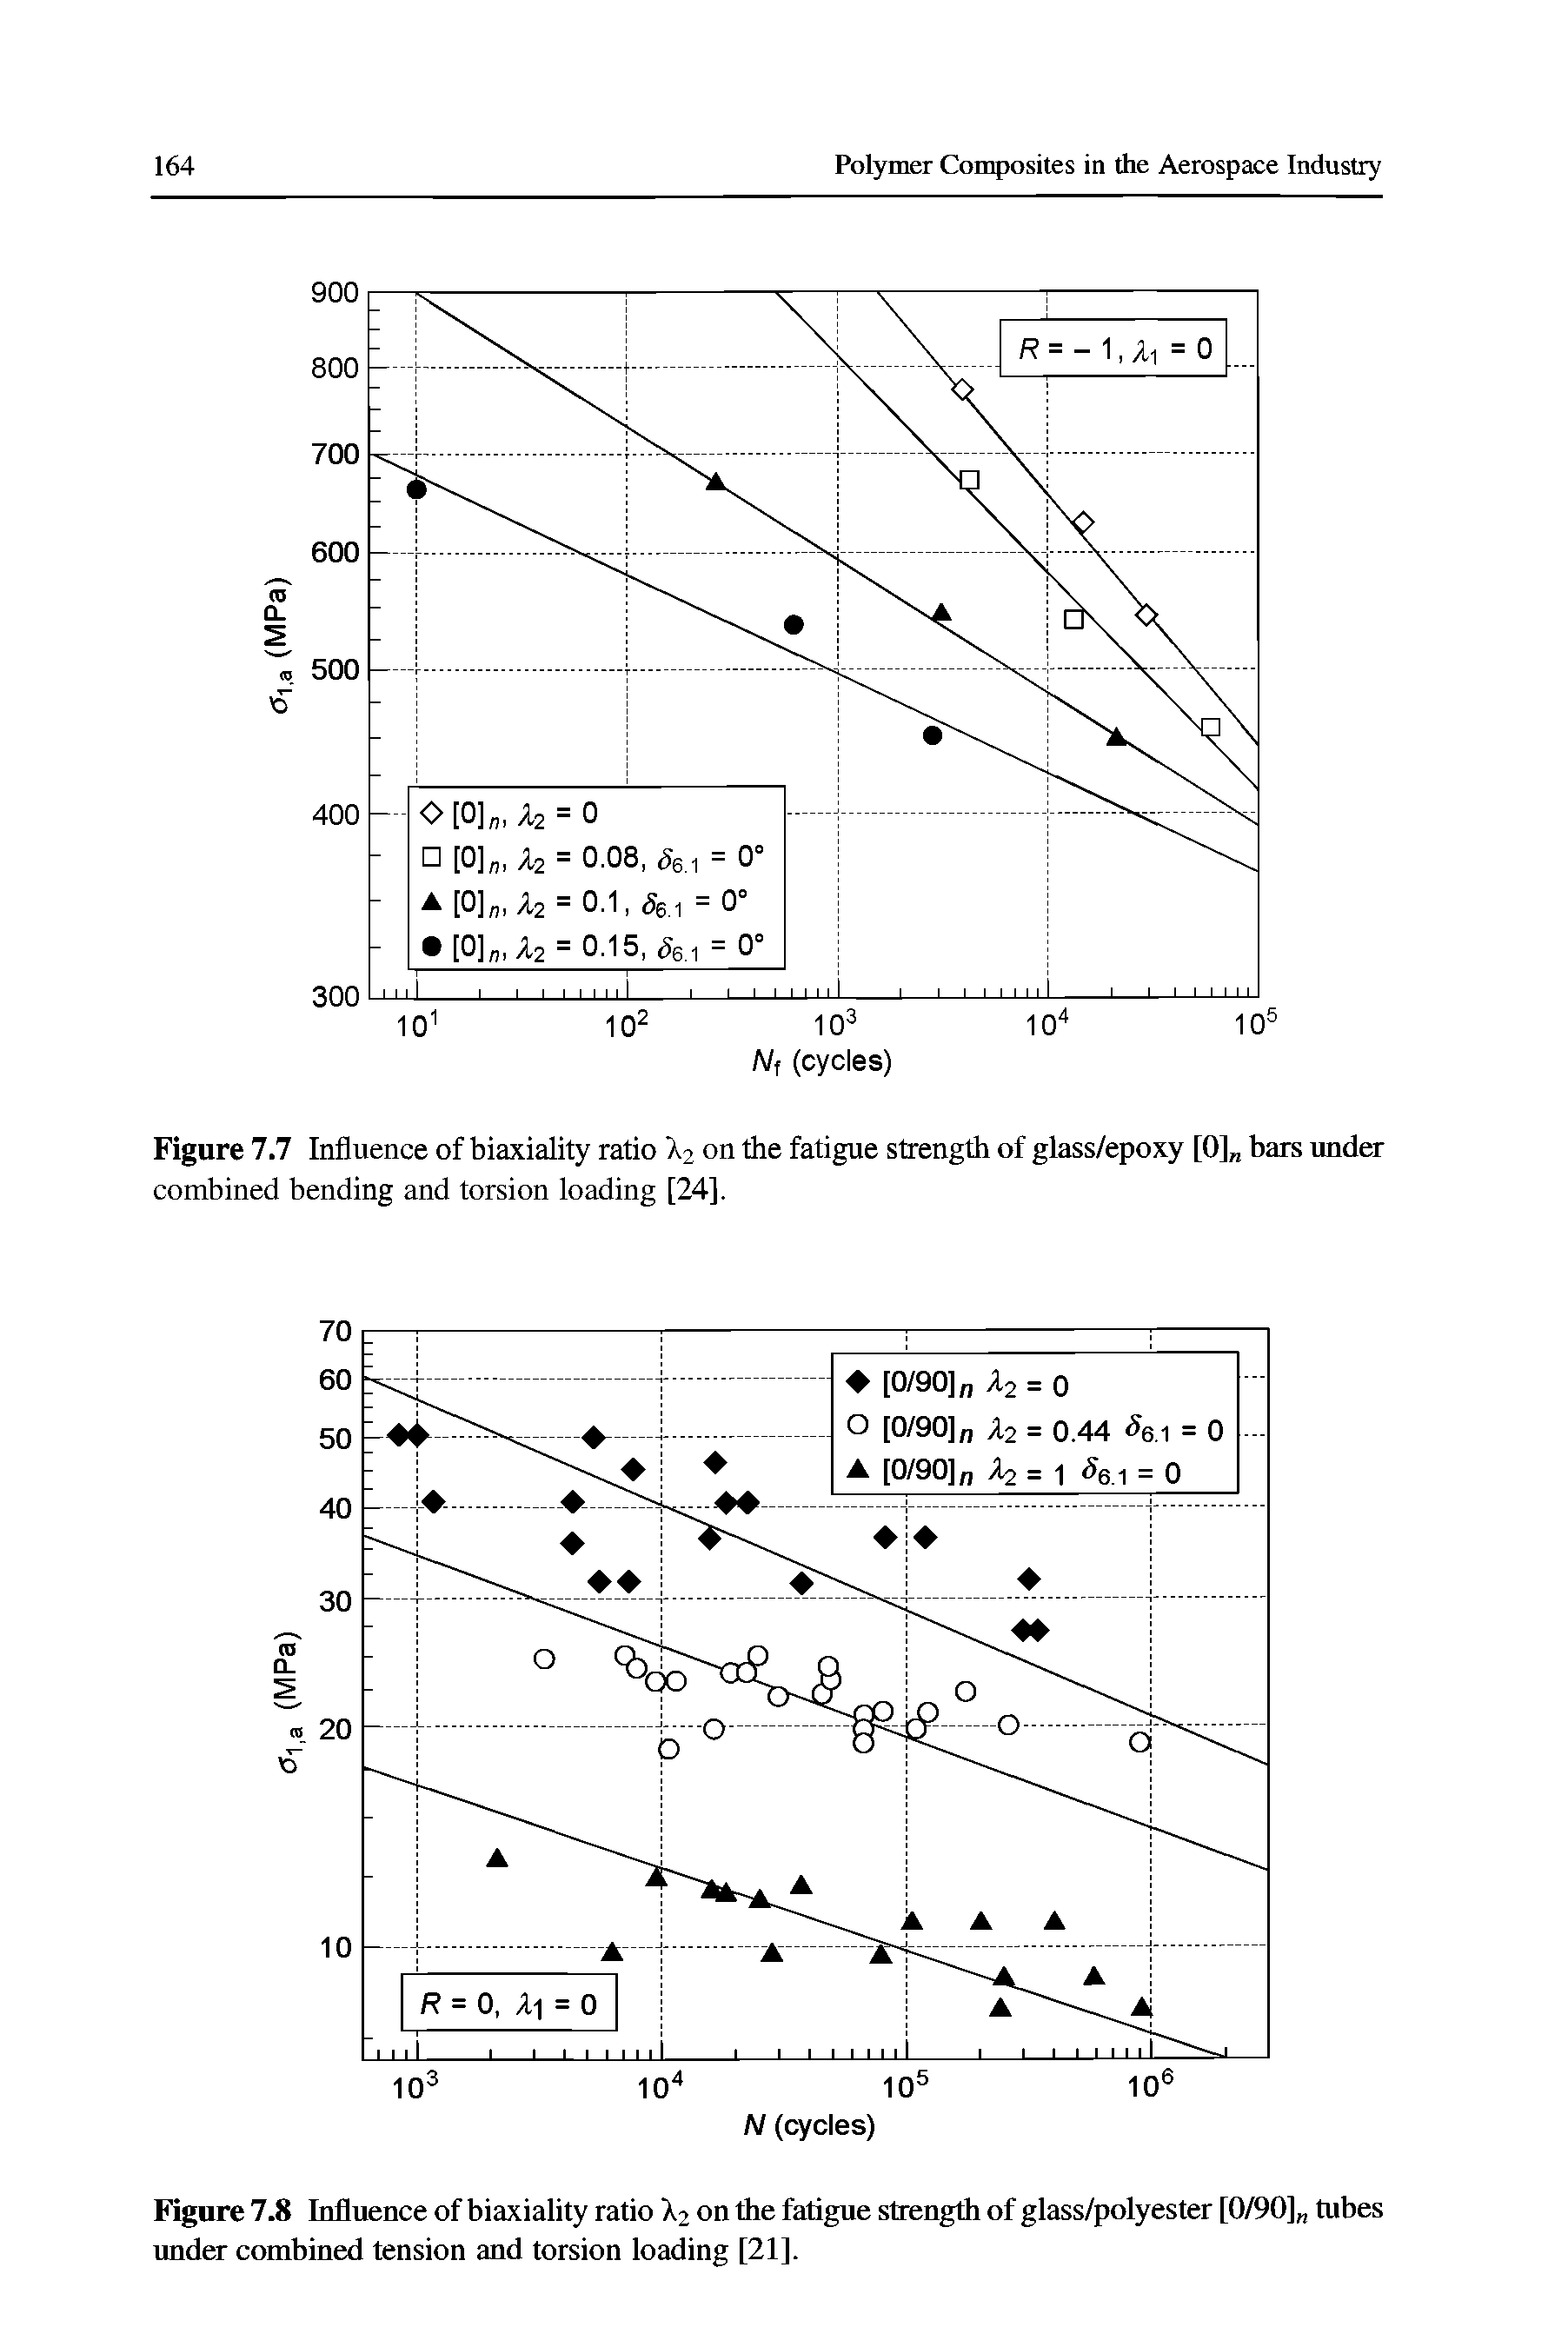 Figure 7.8 Influence of biaxiality ratio X2 on the fatigue strength of glass/polyester [0/90] tubes under combined tension and torsion loading [21],...